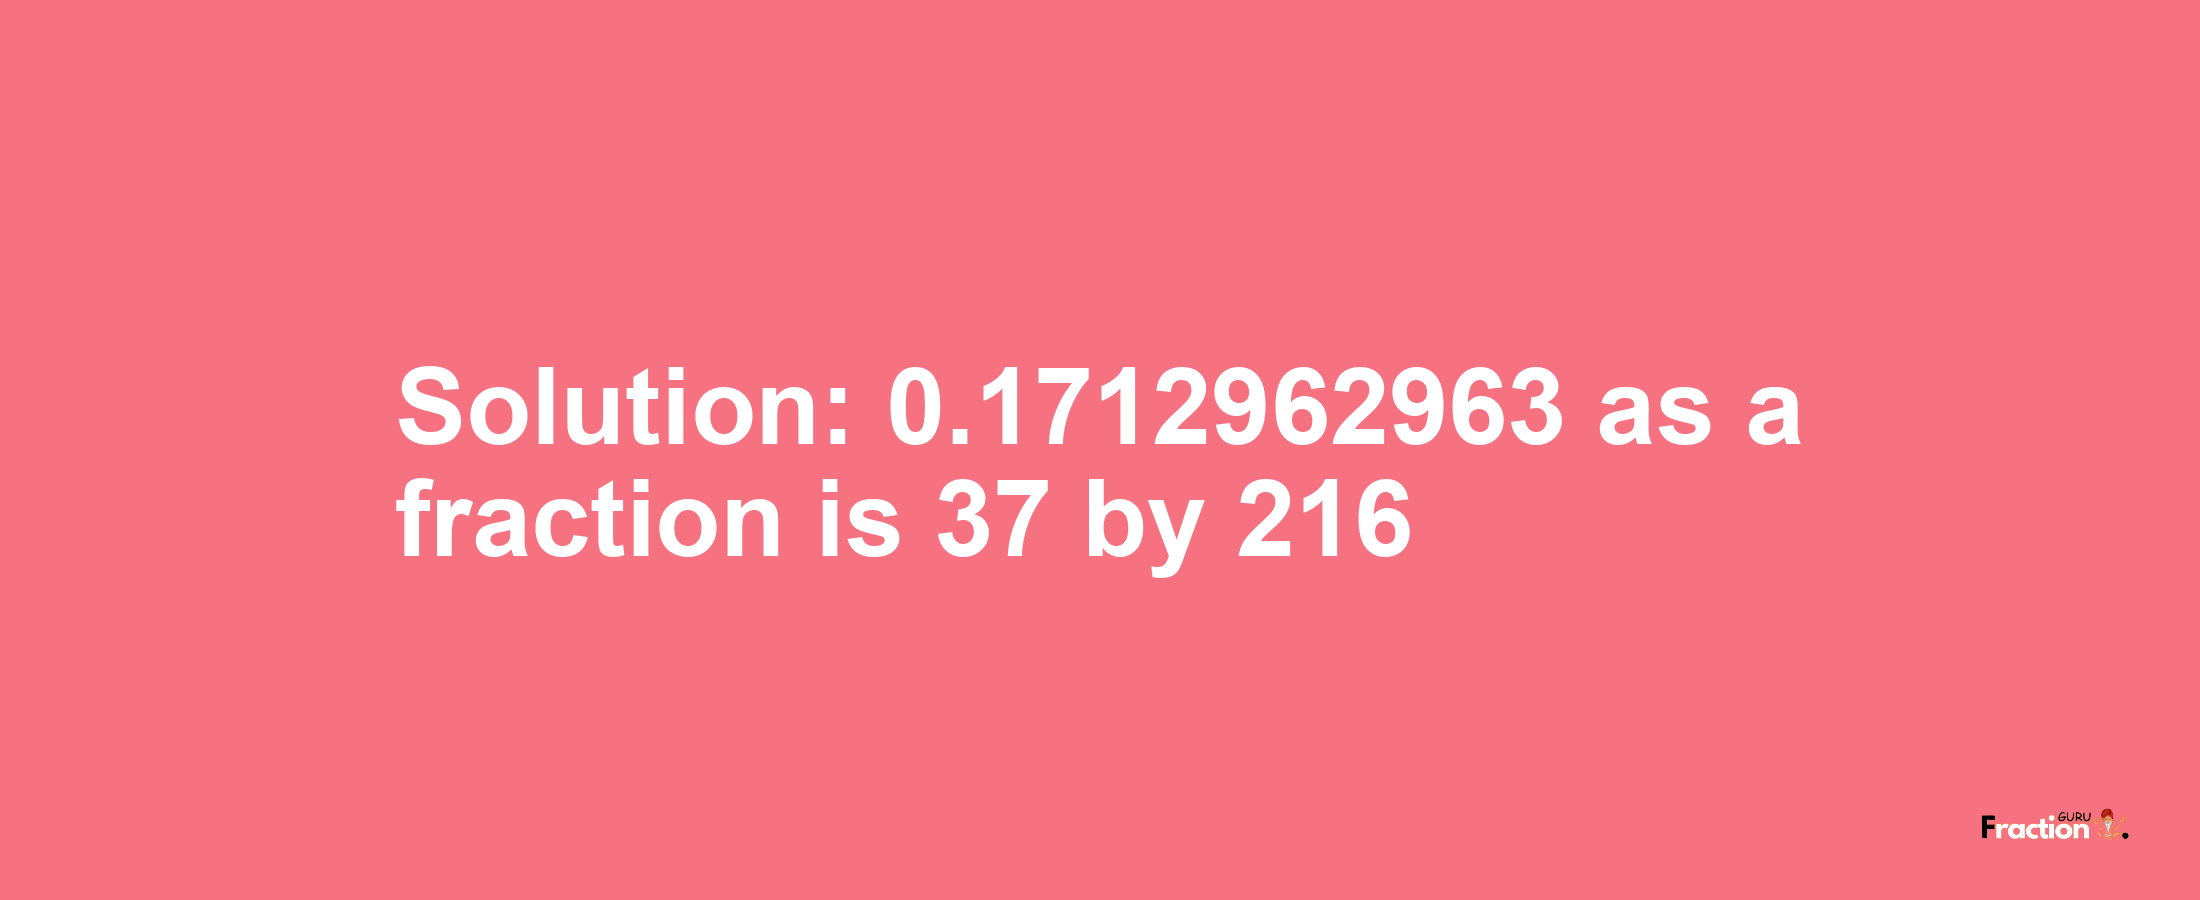 Solution:0.1712962963 as a fraction is 37/216